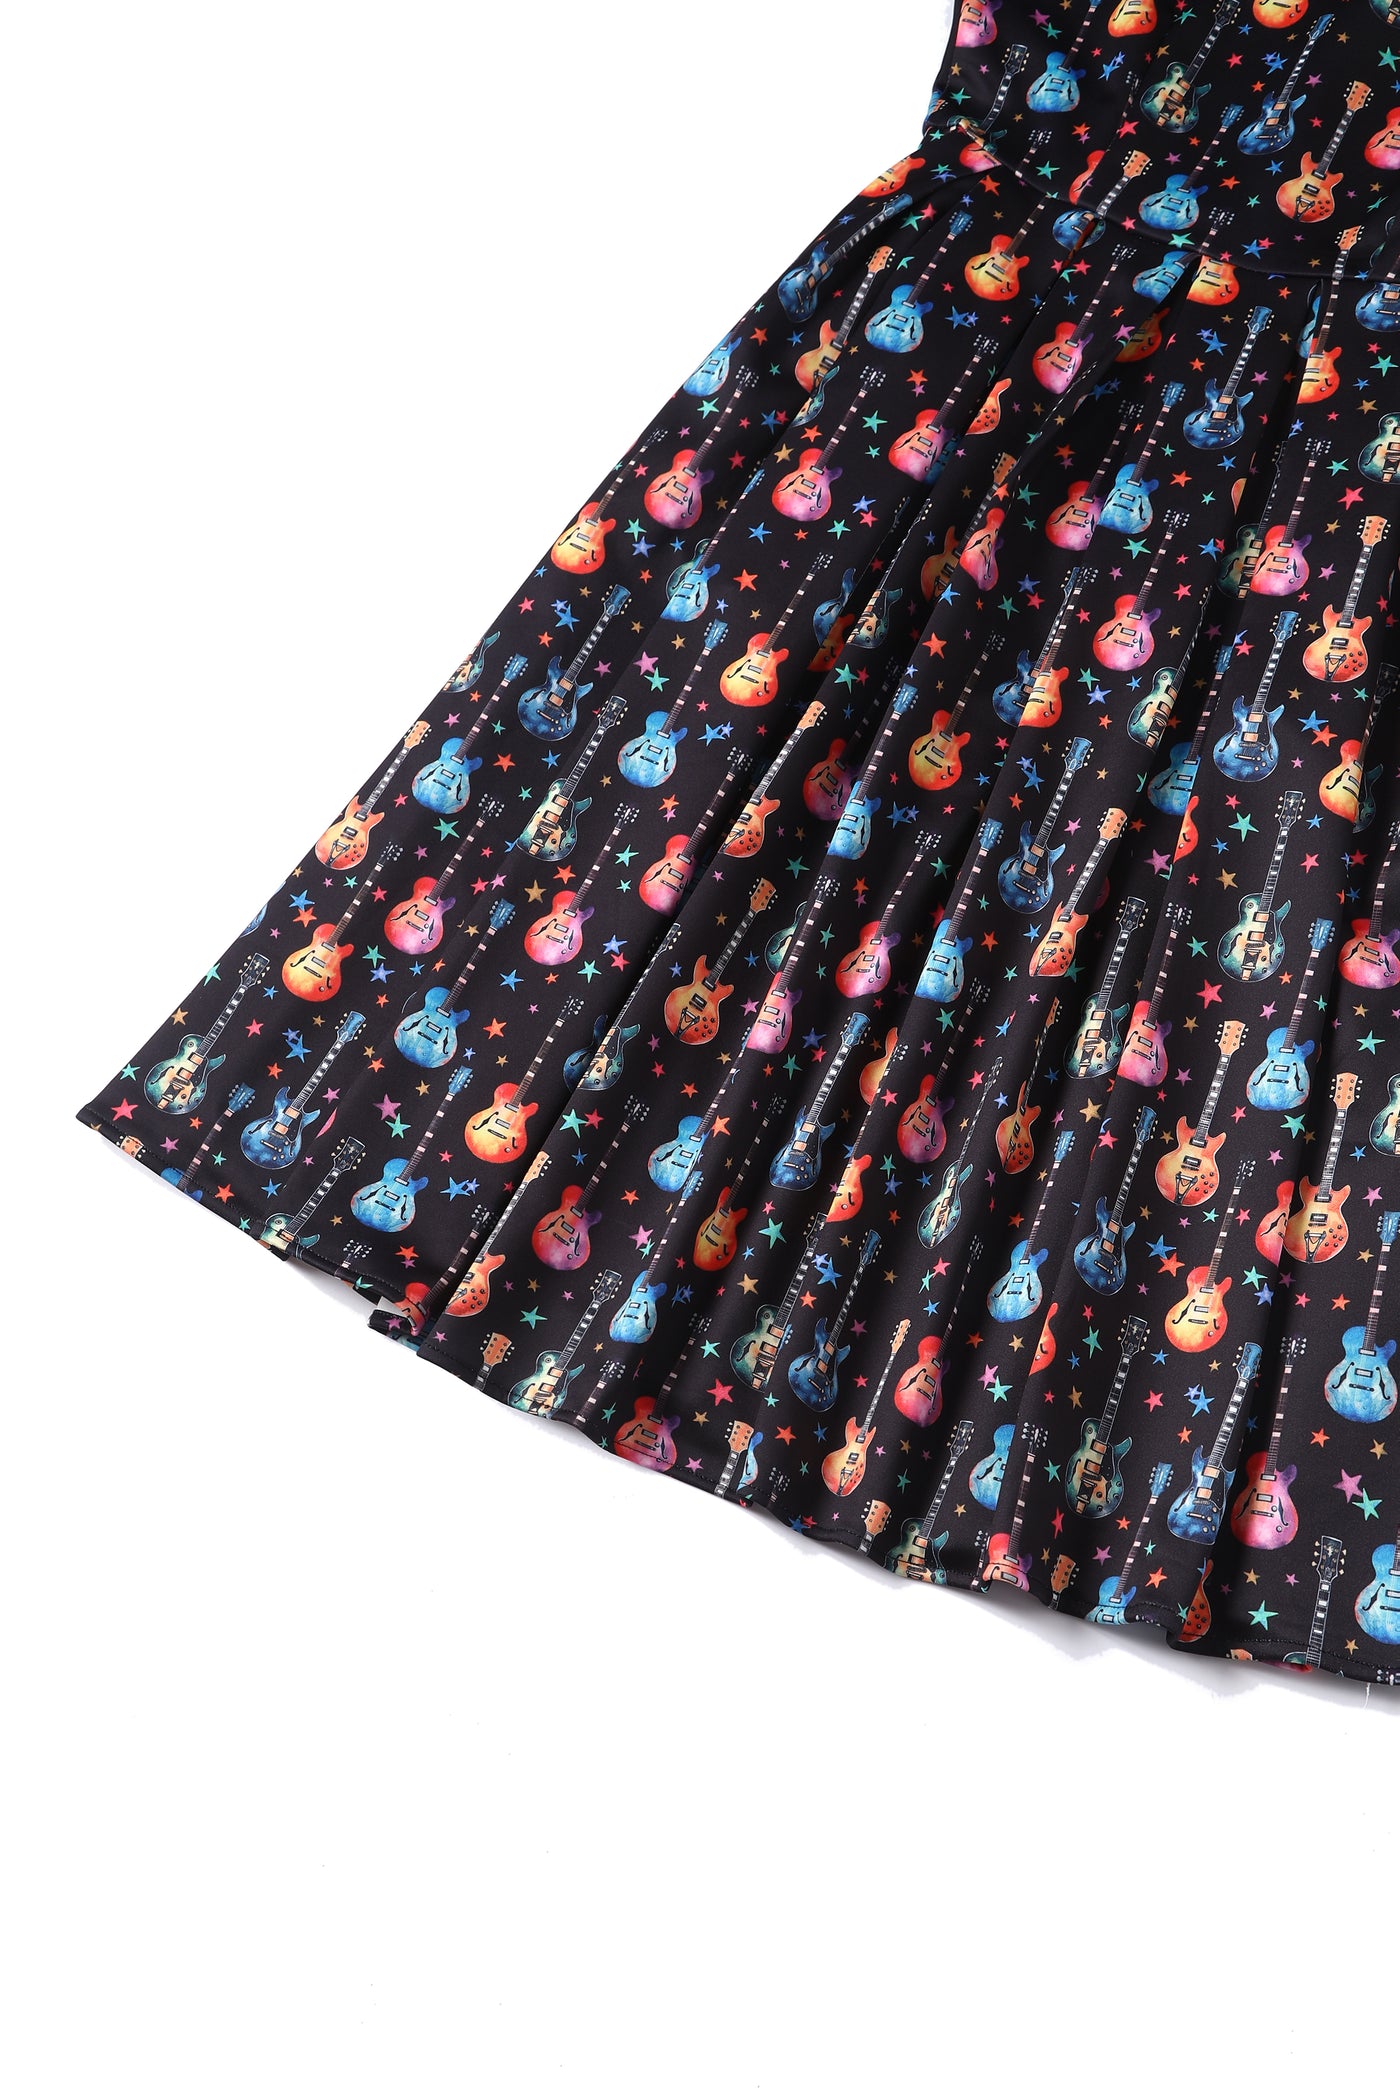 Close up view of Black Pleated Dress in Guitar & Stars Print